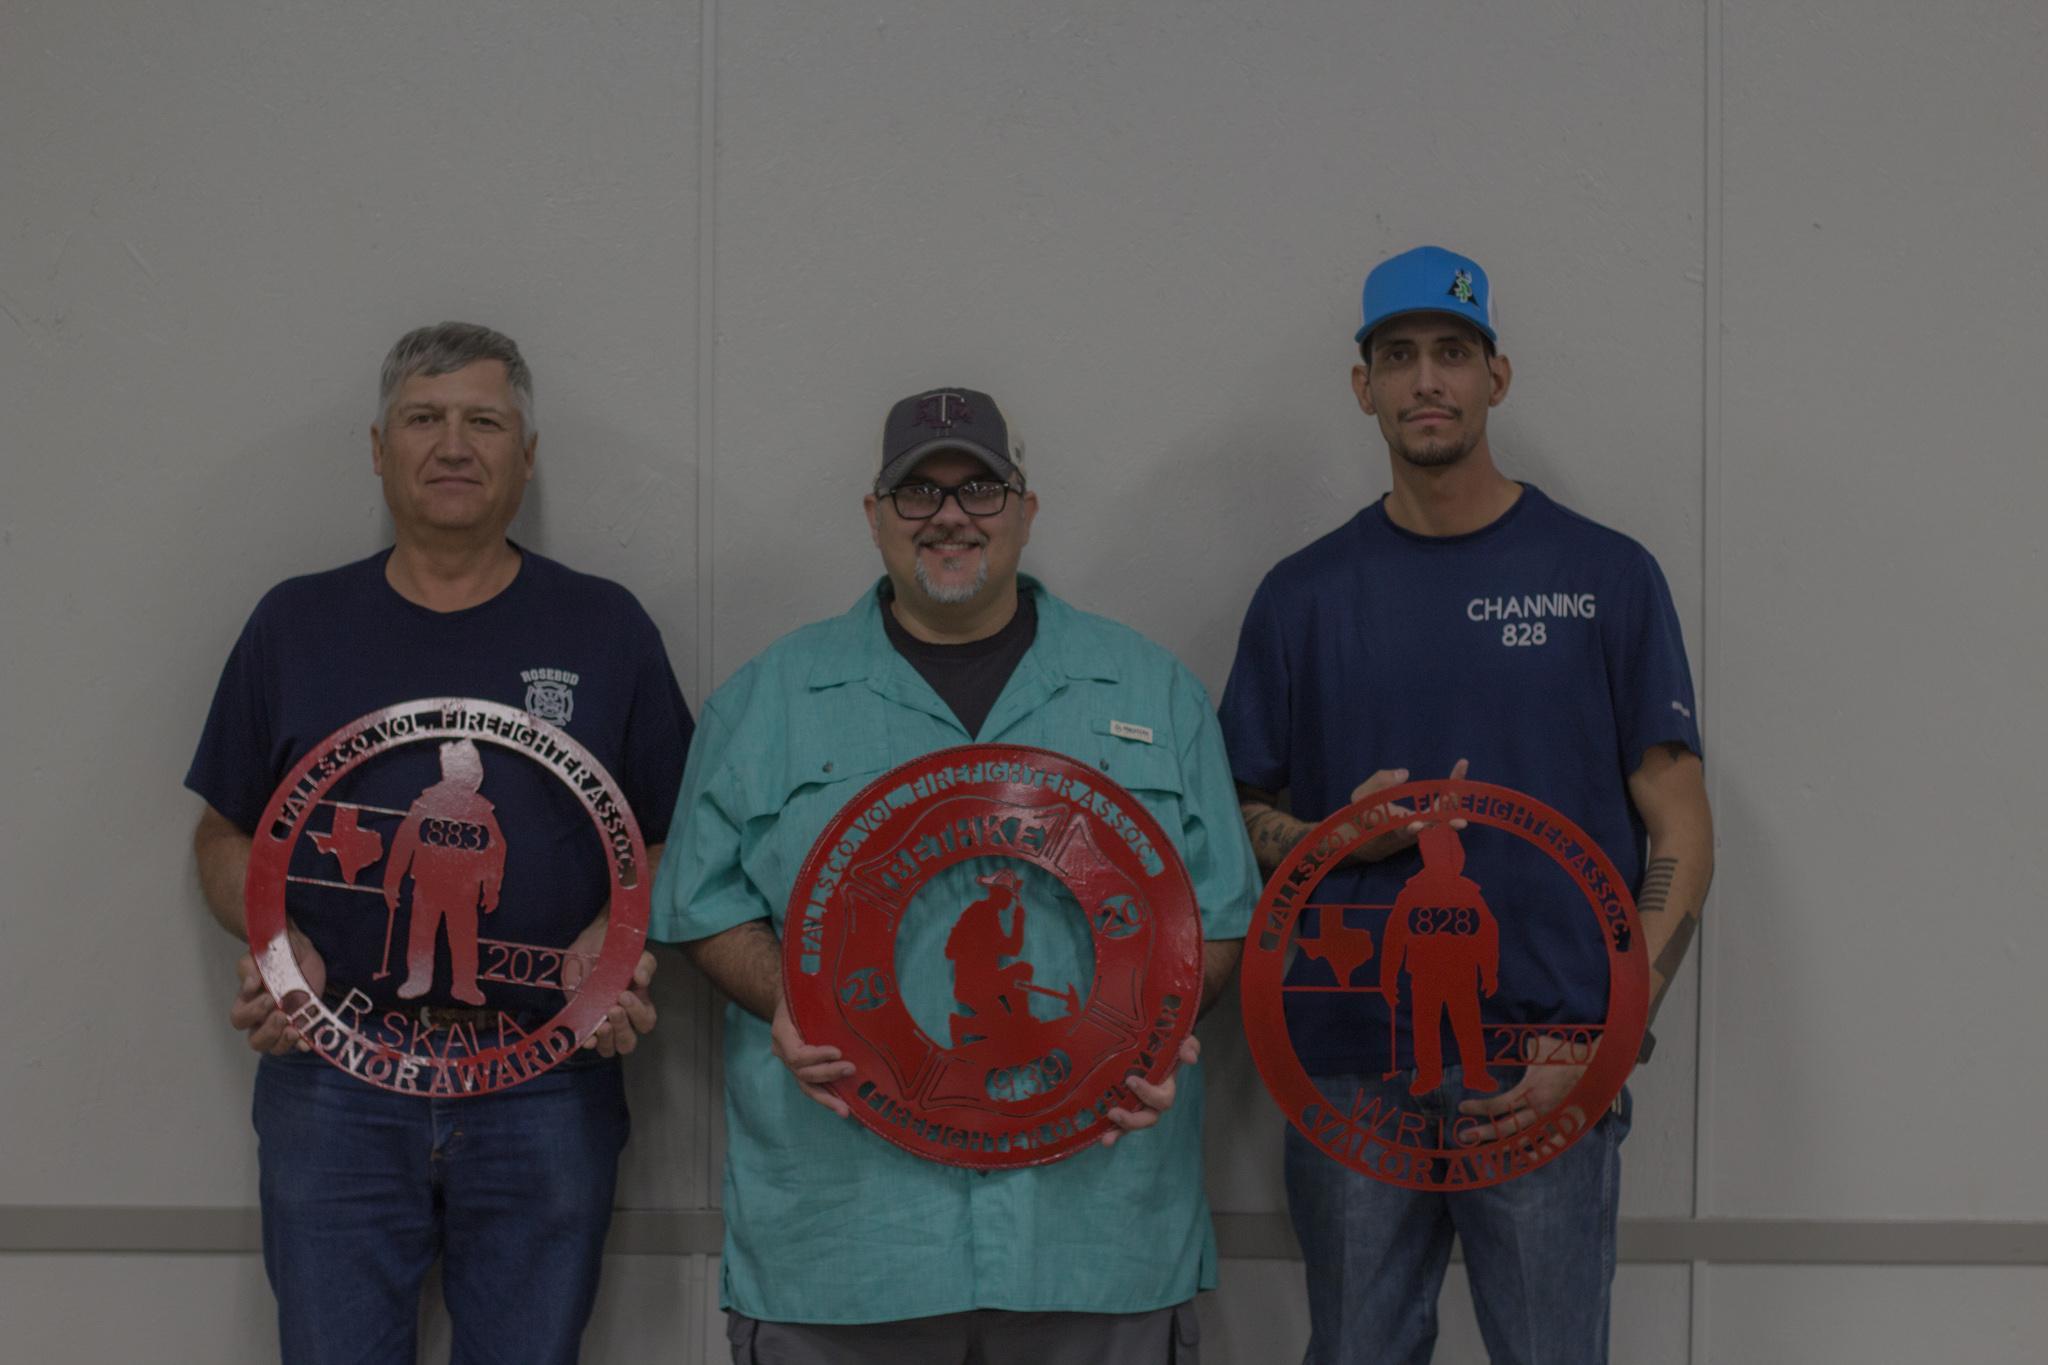 From left, Raymond Skala (Honor), Michael Behke (Fire Fighter of the Year), and Channing Wright (Valor) received personalized metal decals at the Falls County First Responders Dinner.